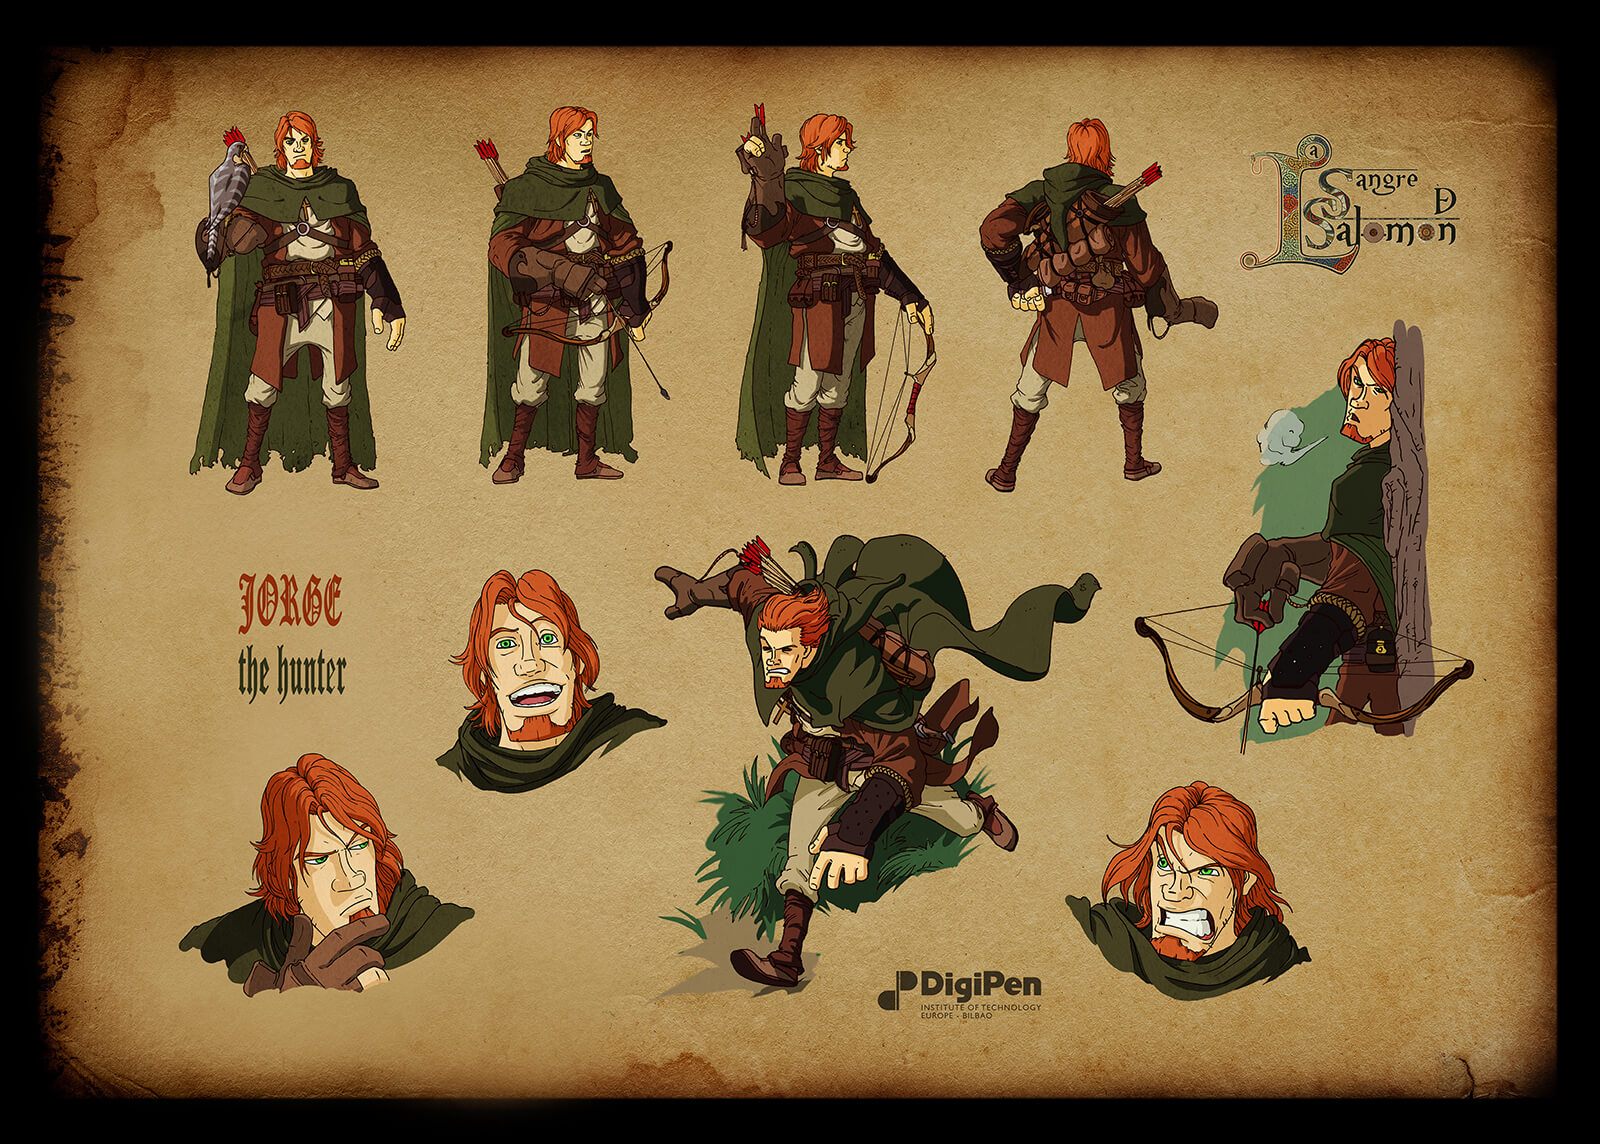 Concept paintings for a red-haired hunter in Sangre de Salomon in various poses in a green coat and bow and arrow